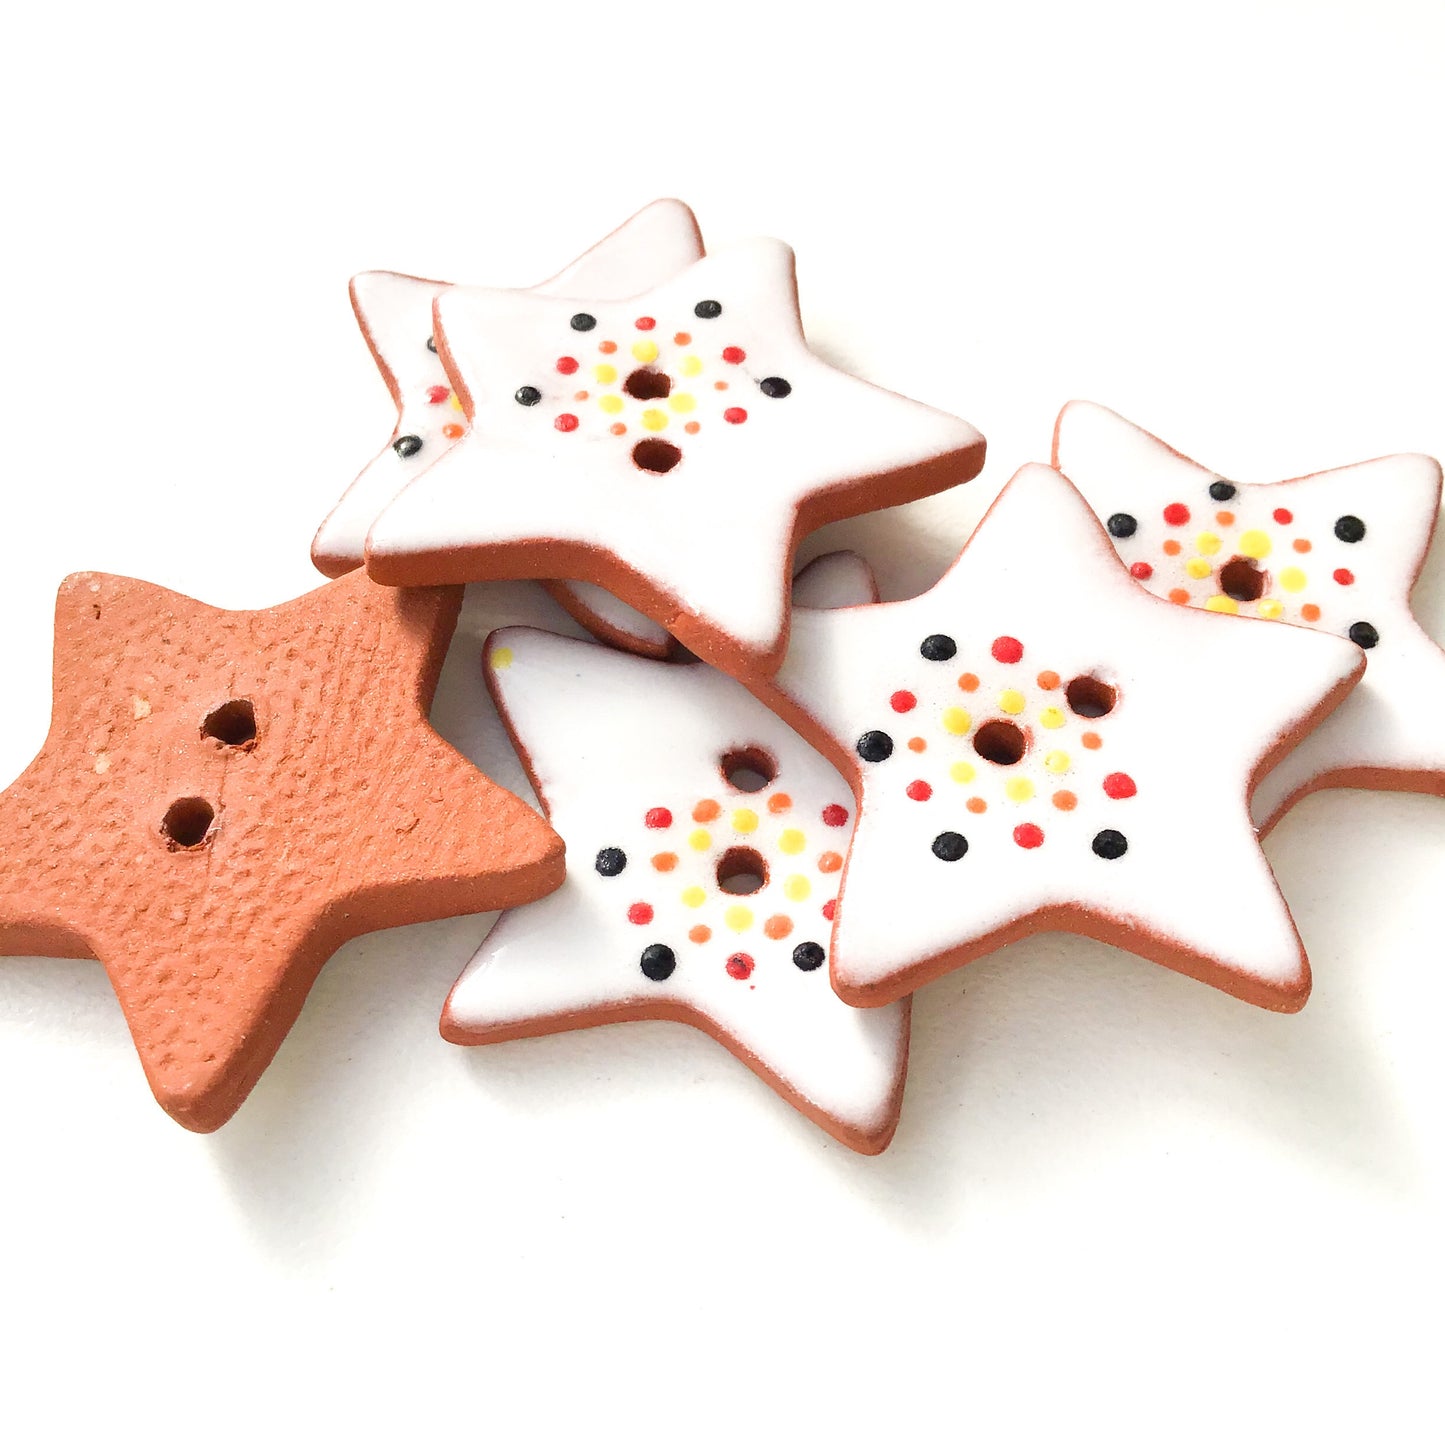 Red & Yellow Color Flare Star Buttons - Ceramic Star Buttons - 1 1/8" (ws-176)